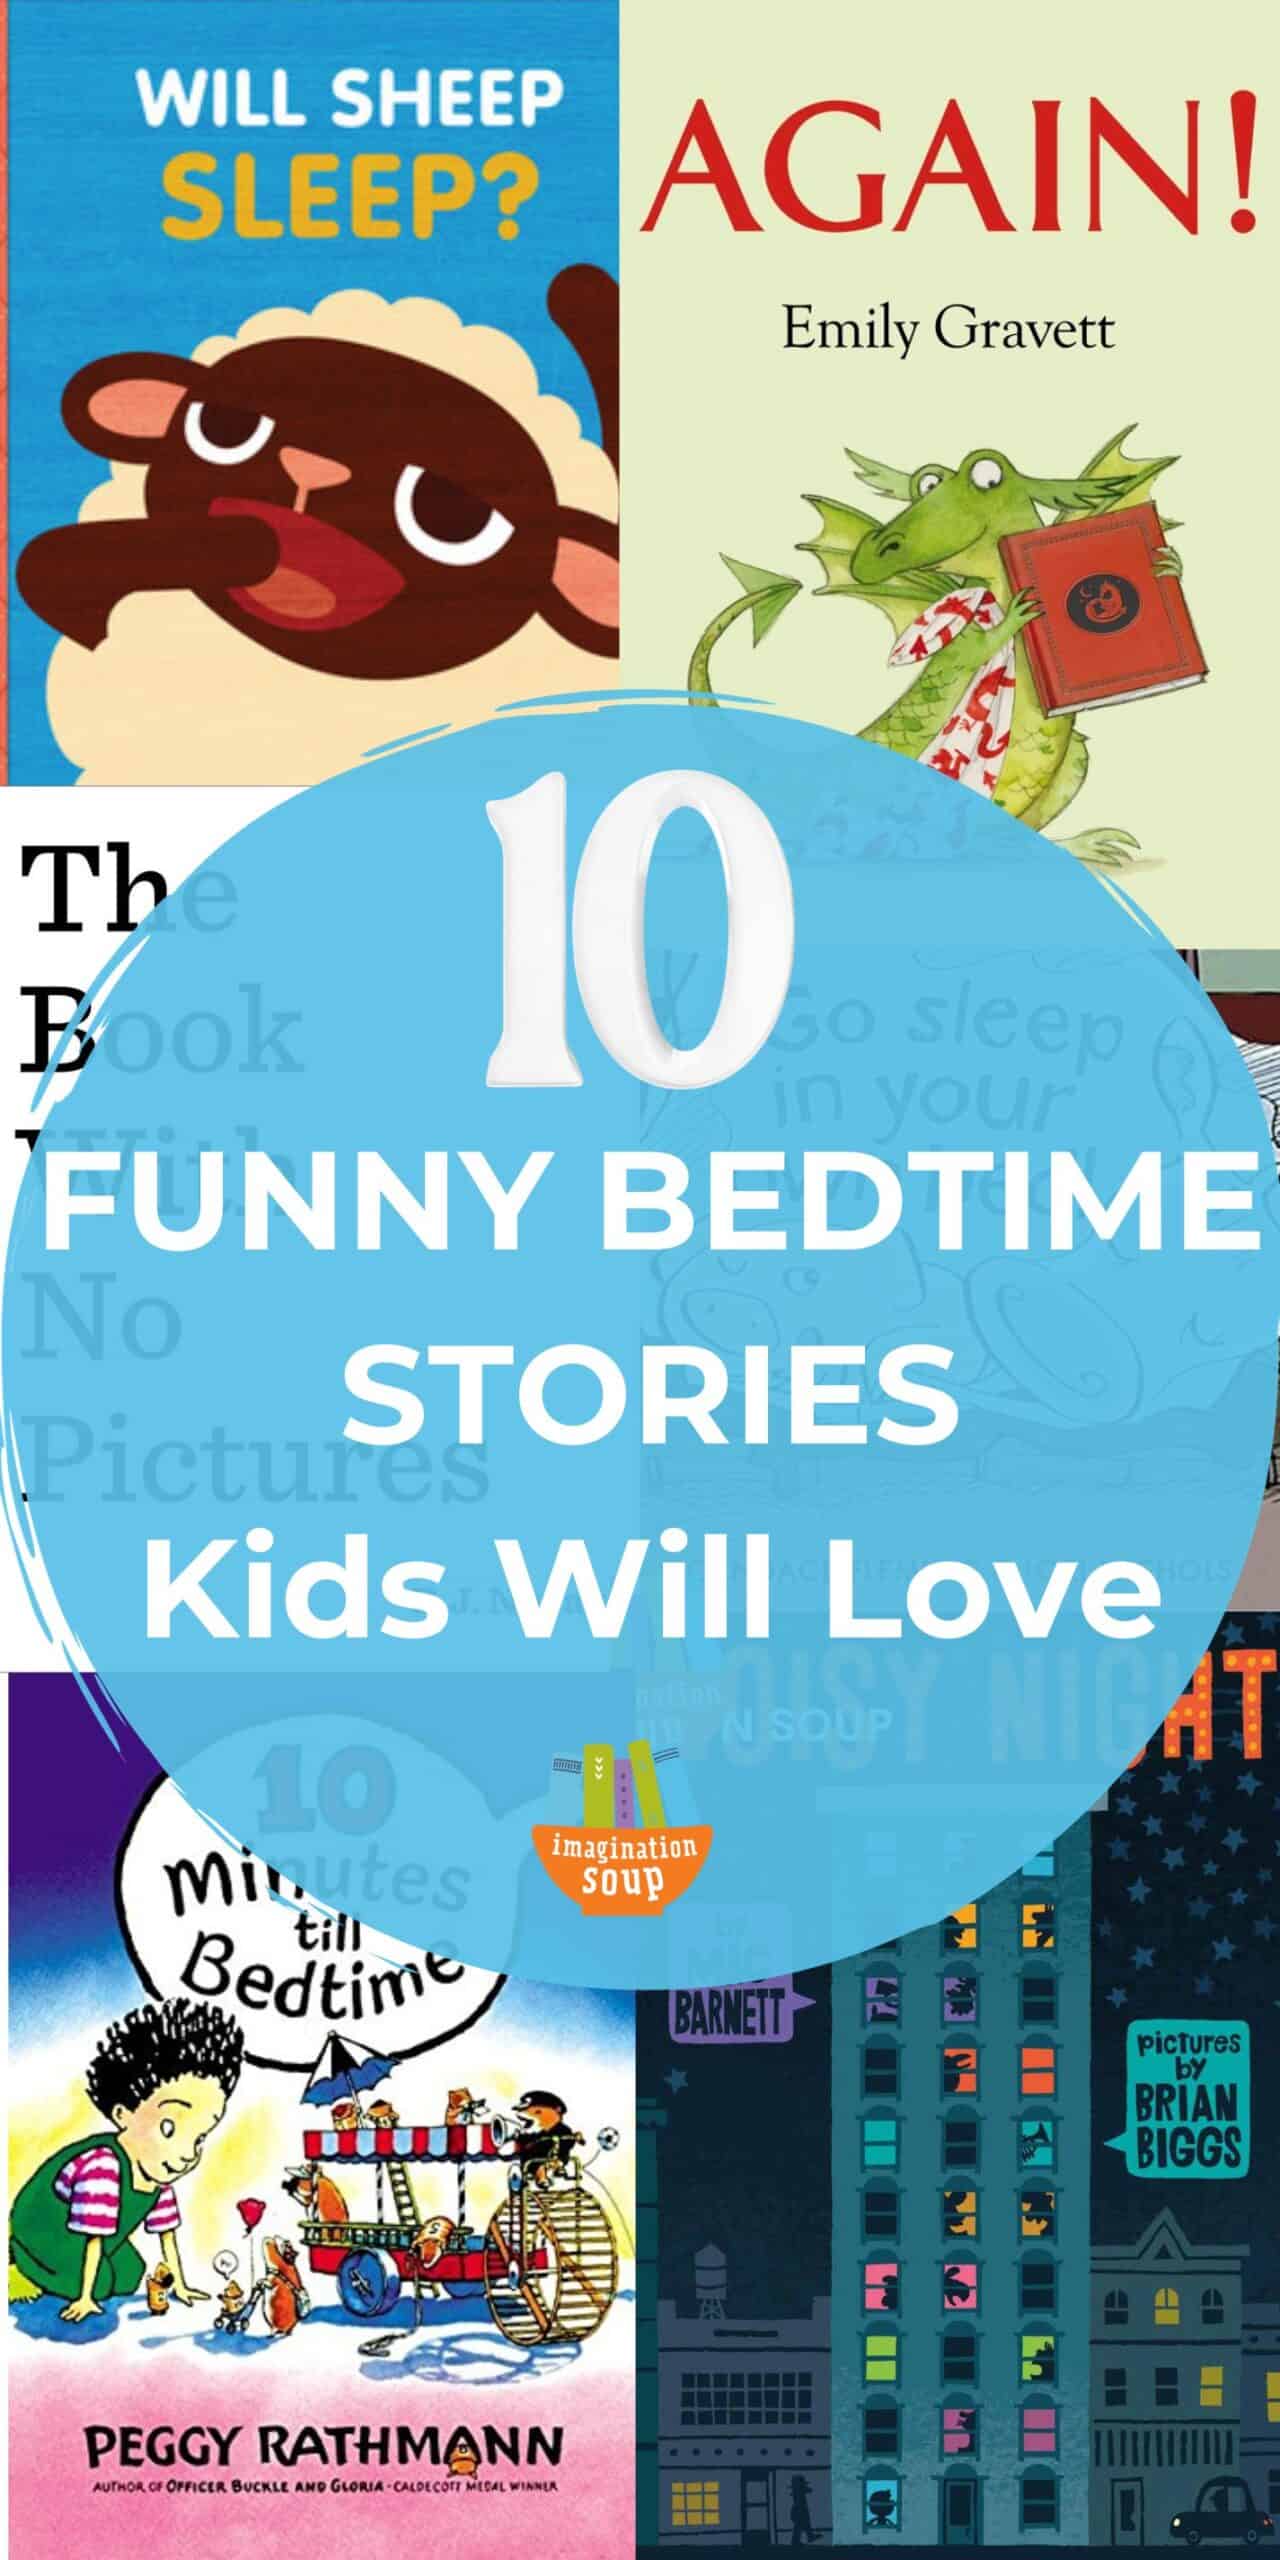 Sometimes bedtime can be the least fun time of day for everyone, kids and parents included! Why not make it a little sillier with some great funny bedtime stories that will get you all laughing instead of crying?